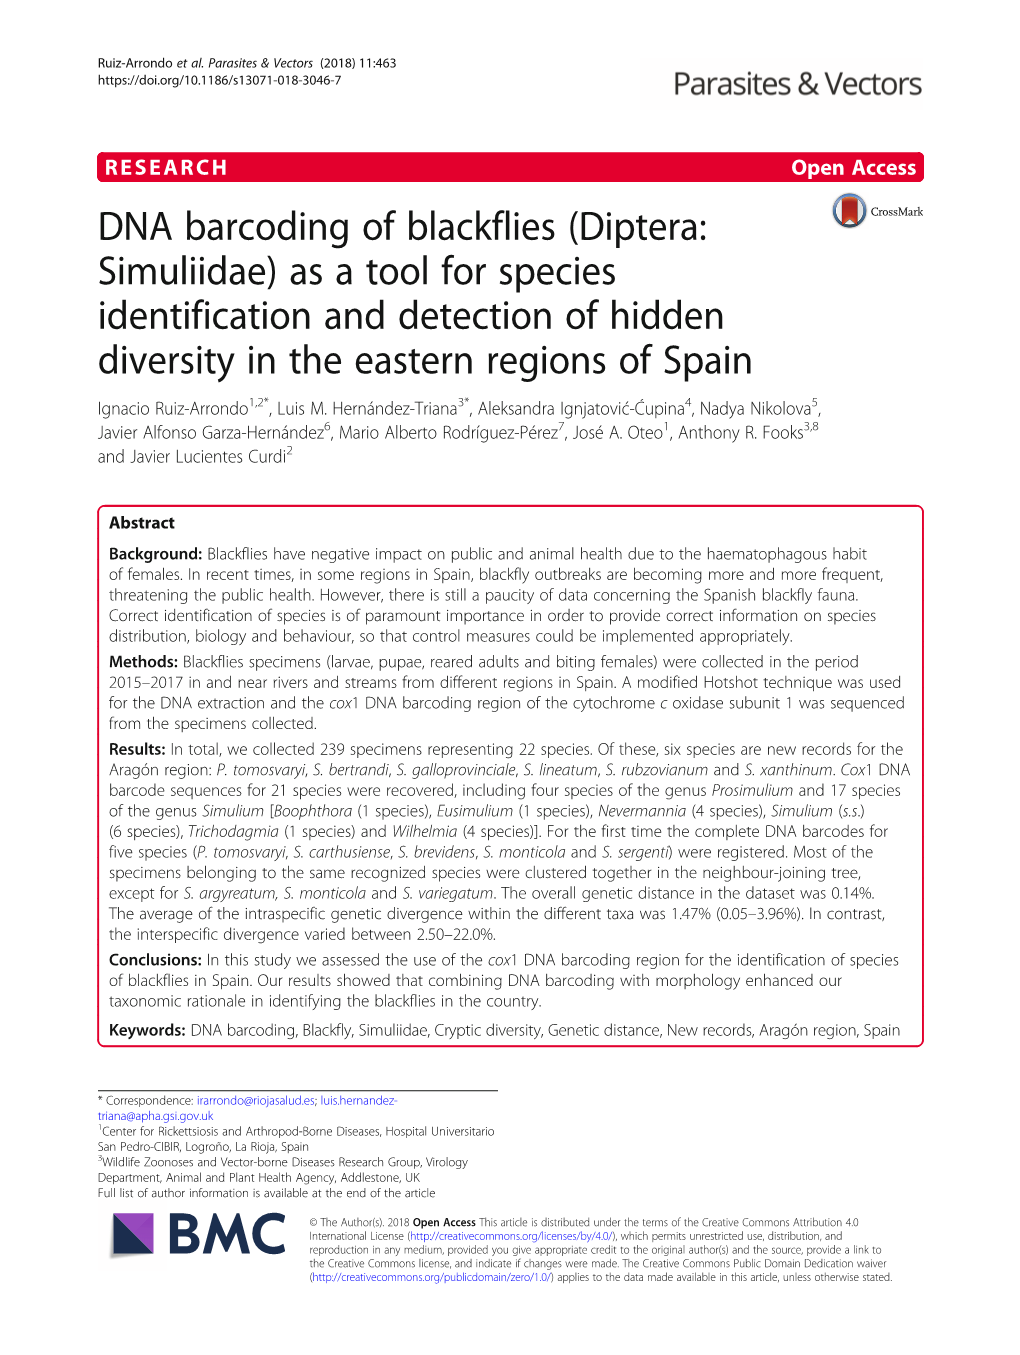 DNA Barcoding of Blackflies (Diptera: Simuliidae) As a Tool for Species